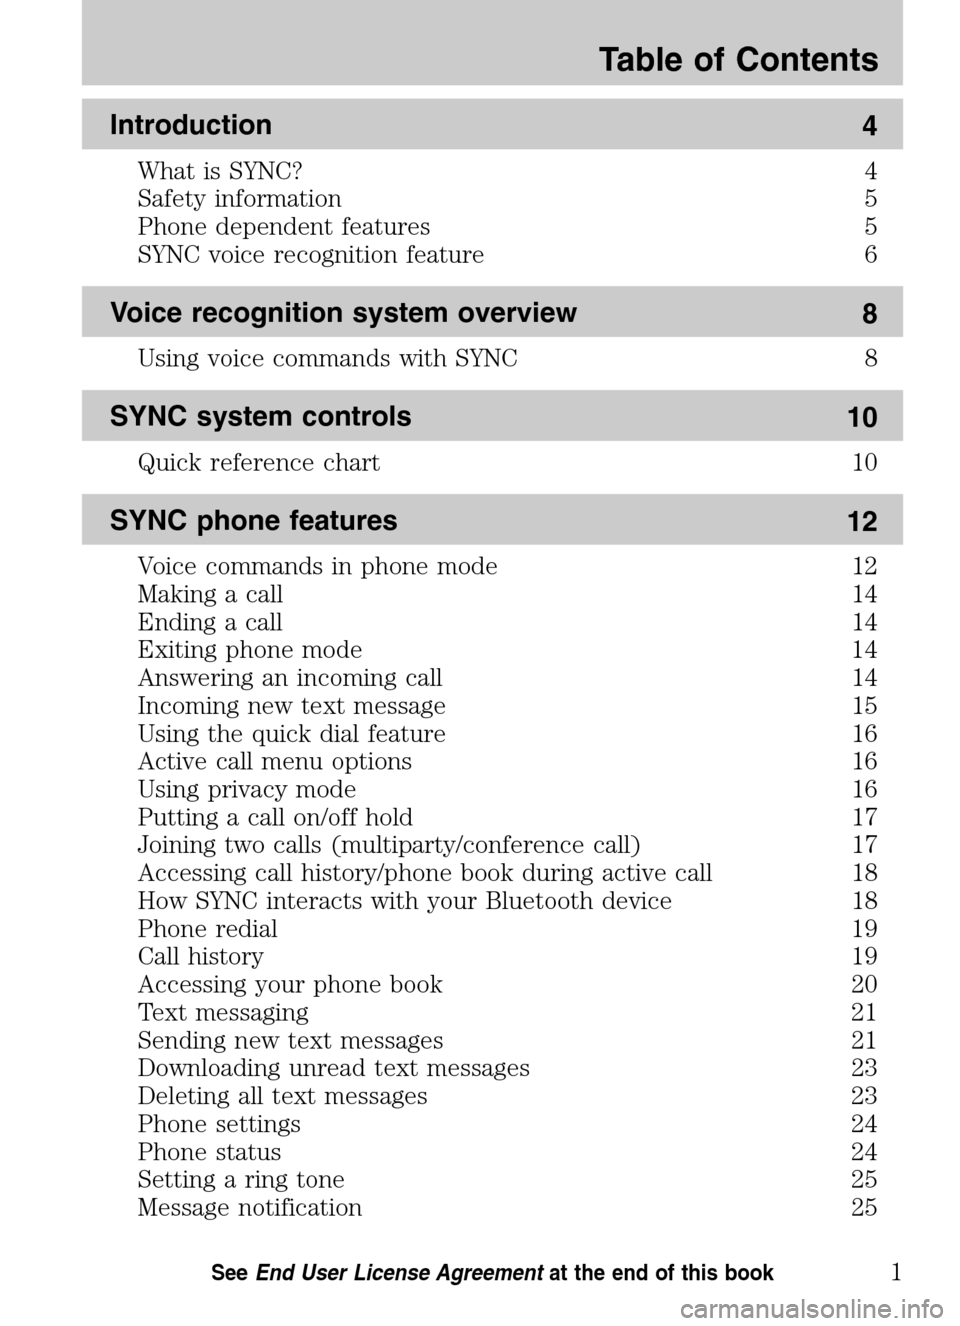 Mercury Milan 2009  SYNC Supplement  Introduction 4
What is SYNC? 4 
Safety information 5
Phone dependent features 5
SYNC voice recognition feature 6
Voice recognition system overview 8
Using voice commands with SYNC 8
SYNC system contro